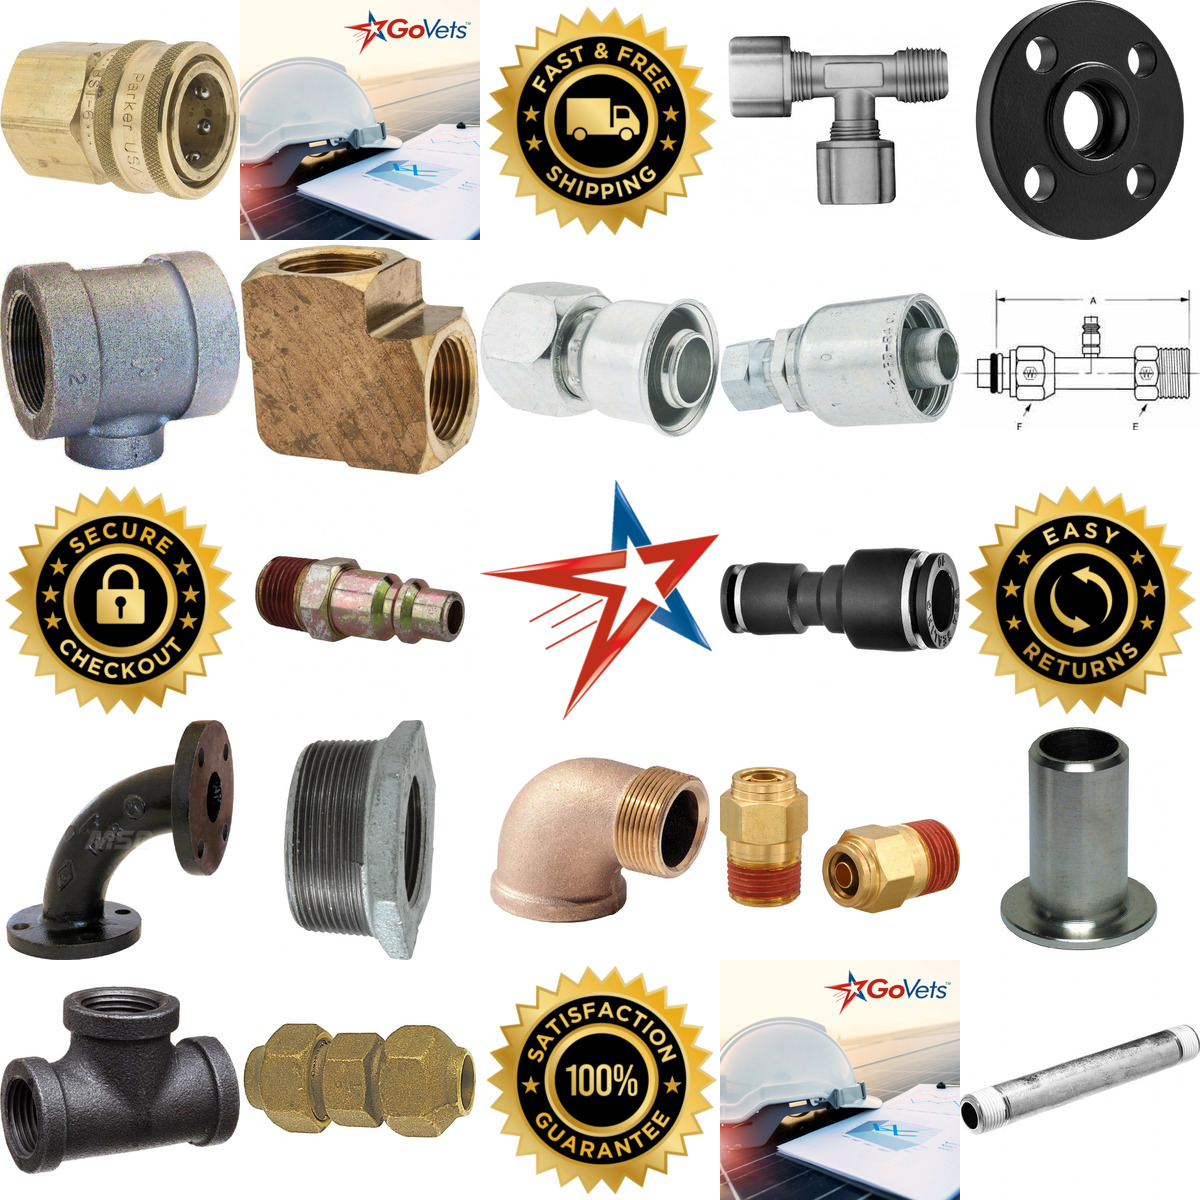 A selection of Fittings and Couplings products on GoVets